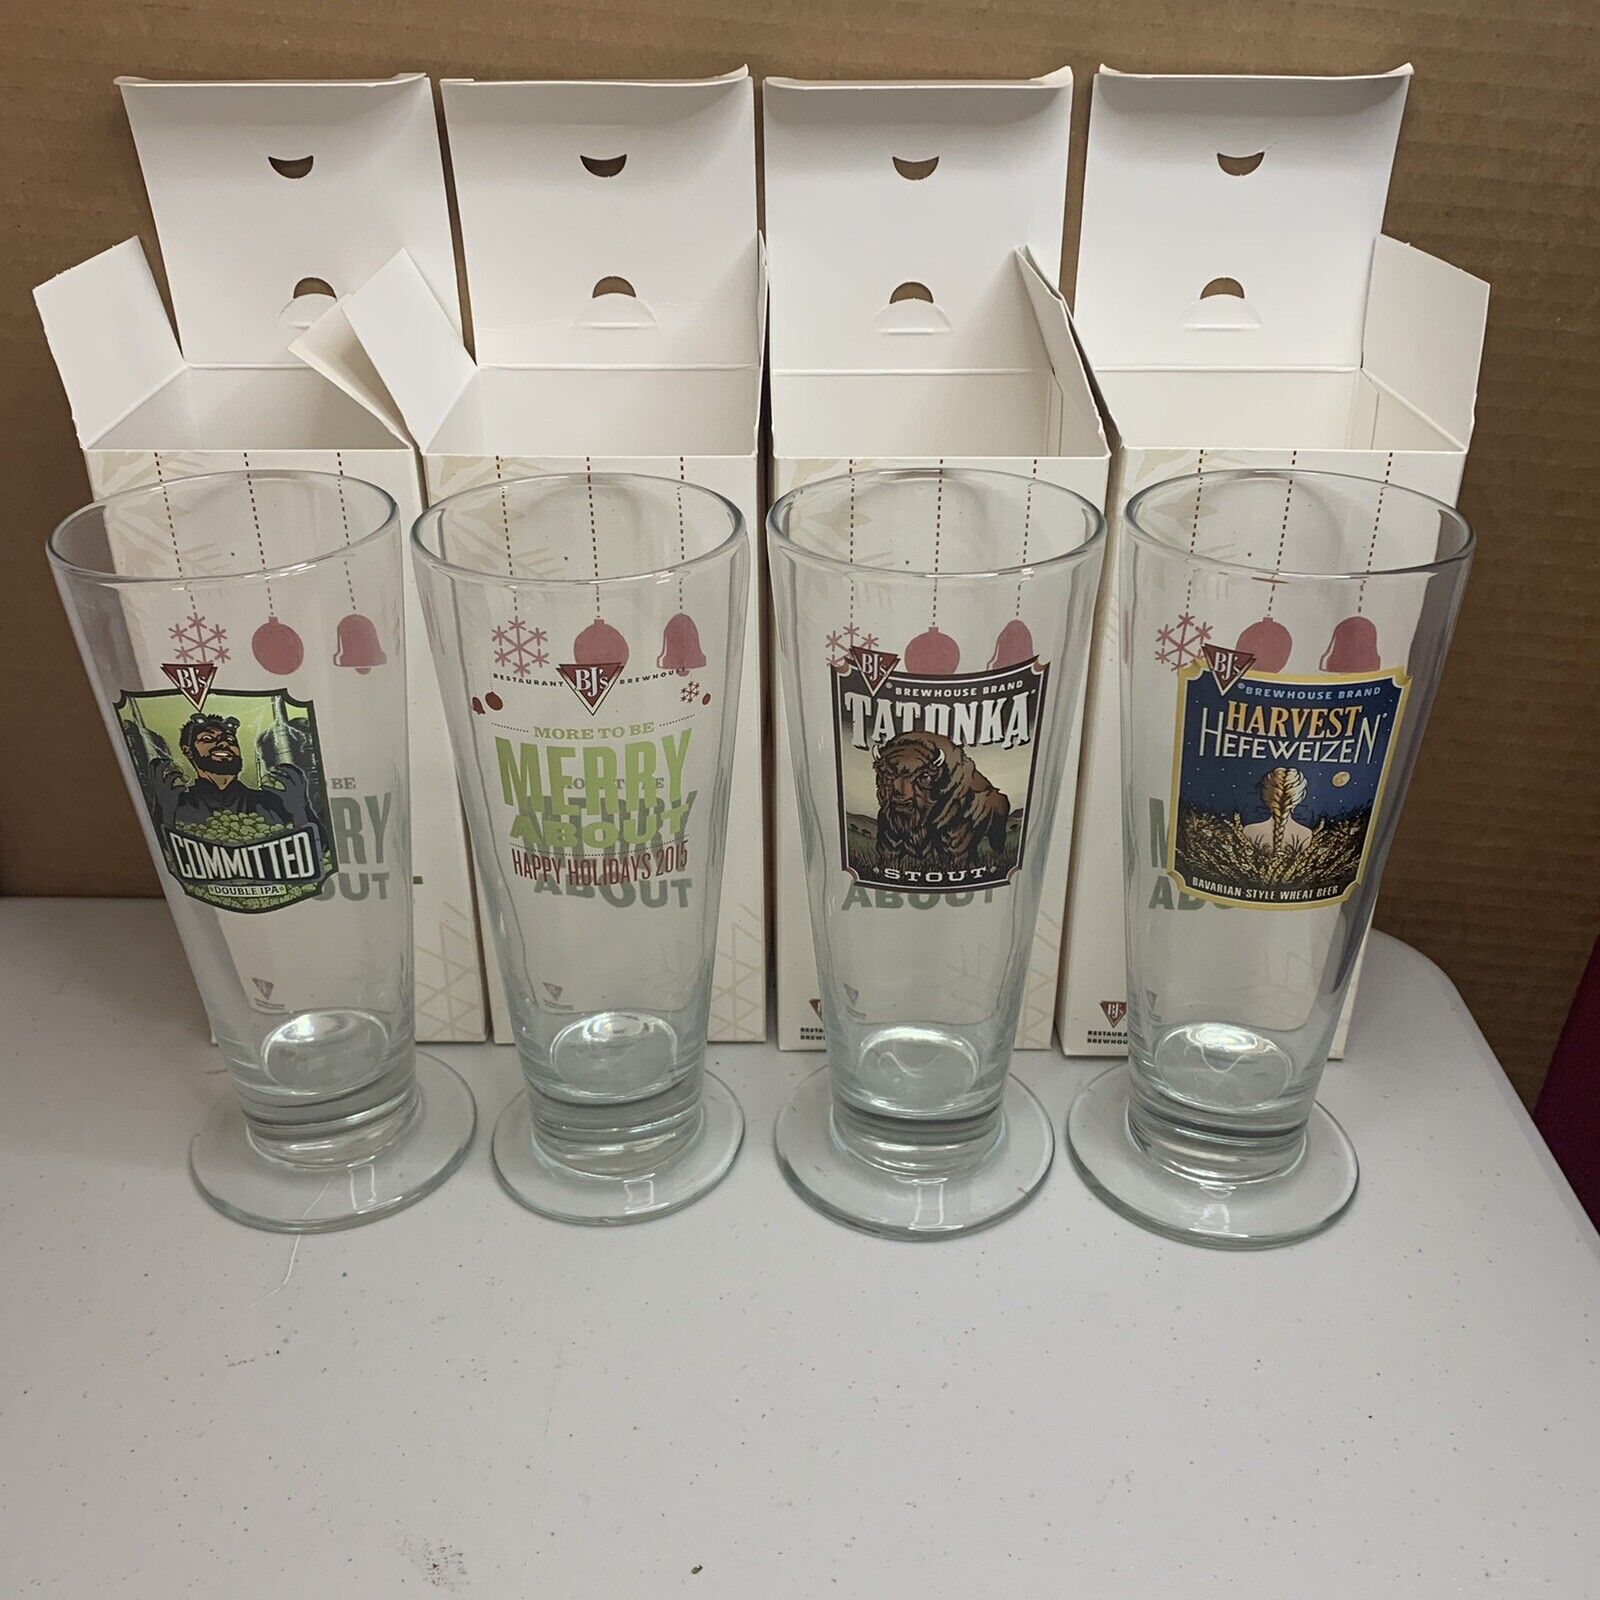 2015 BJ's Brewhouse Beer Glasses Set of 4 Harvest Hefeweizen, Committed Stout…